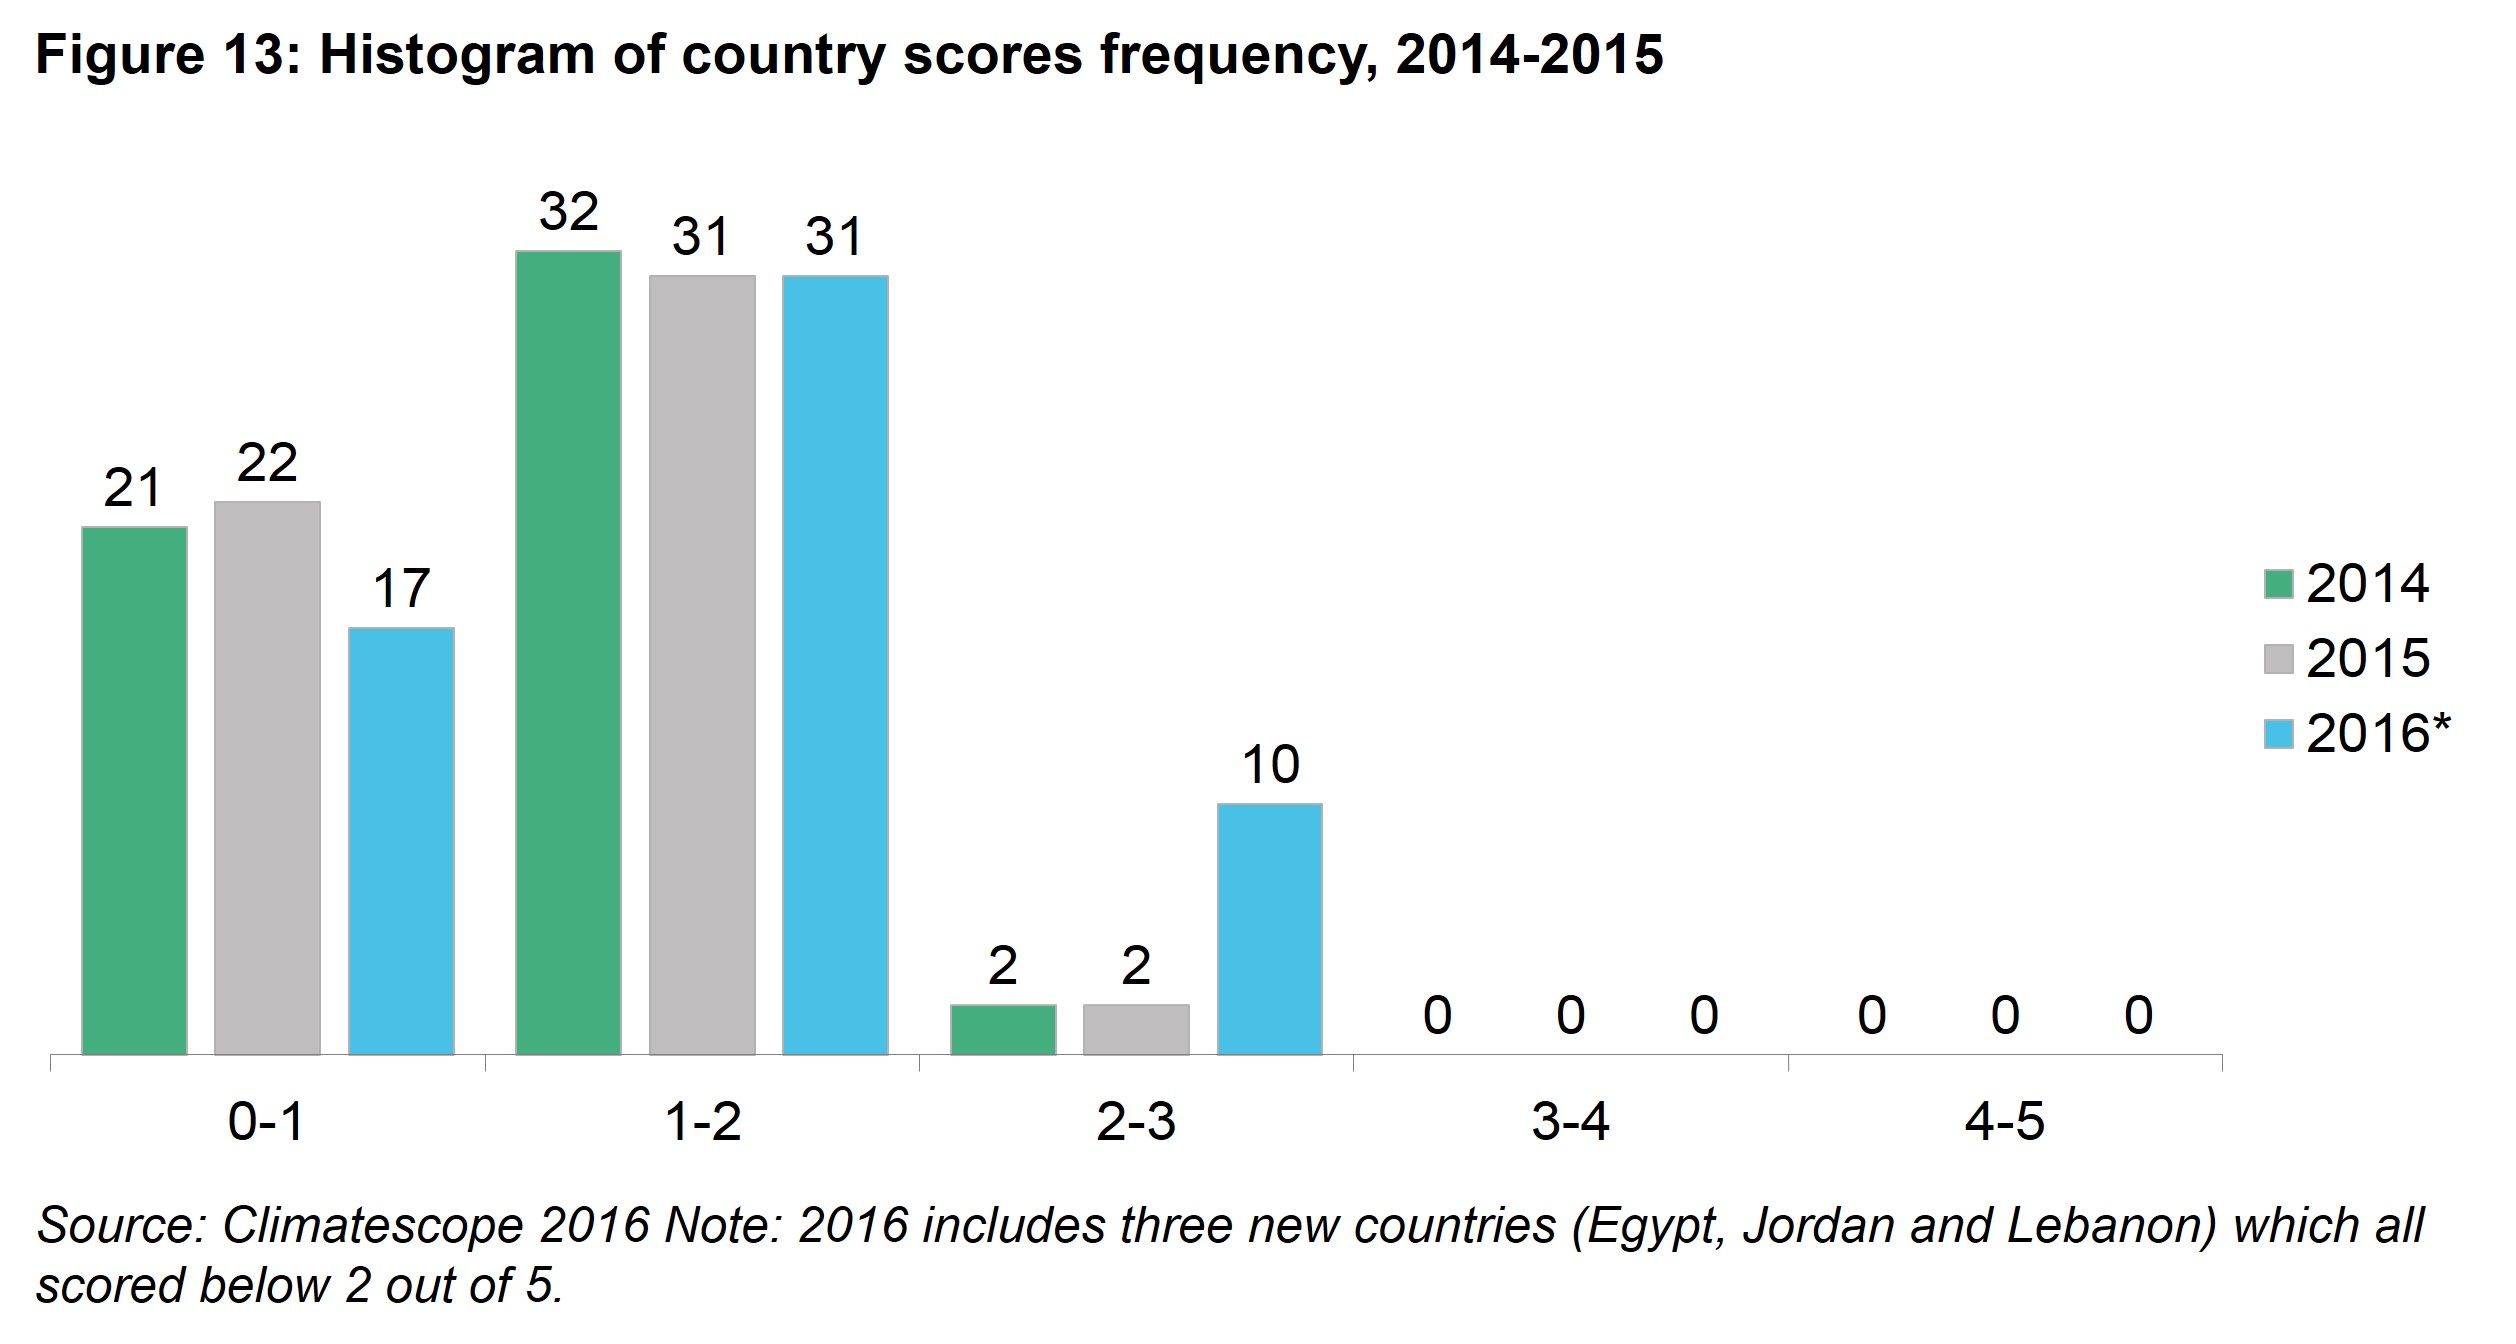 Executive Summary Fig 13 - Histogram of country scores frequency, 2014-2015